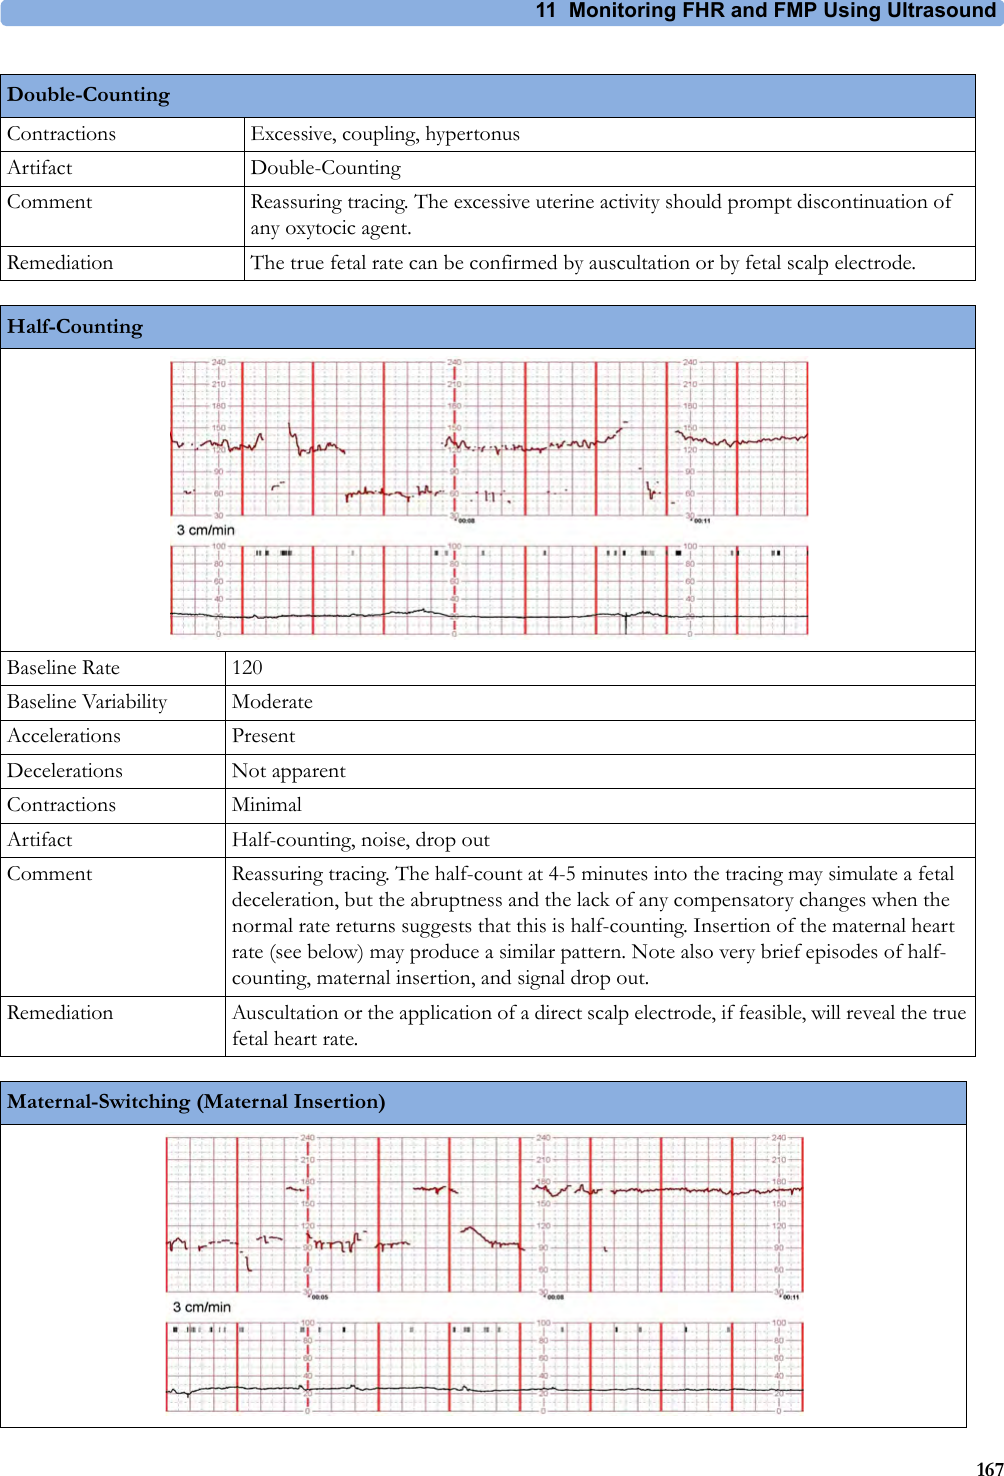 11 Monitoring FHR and FMP Using Ultrasound167Contractions Excessive, coupling, hypertonusArtifact Double-CountingComment Reassuring tracing. The excessive uterine activity should prompt discontinuation of any oxytocic agent.Remediation The true fetal rate can be confirmed by auscultation or by fetal scalp electrode.Double-CountingHalf-CountingBaseline Rate 120Baseline Variability ModerateAccelerations PresentDecelerations Not apparentContractions MinimalArtifact Half-counting, noise, drop outComment Reassuring tracing. The half-count at 4-5 minutes into the tracing may simulate a fetal deceleration, but the abruptness and the lack of any compensatory changes when the normal rate returns suggests that this is half-counting. Insertion of the maternal heart rate (see below) may produce a similar pattern. Note also very brief episodes of half-counting, maternal insertion, and signal drop out.Remediation Auscultation or the application of a direct scalp electrode, if feasible, will reveal the true fetal heart rate.Maternal-Switching (Maternal Insertion)